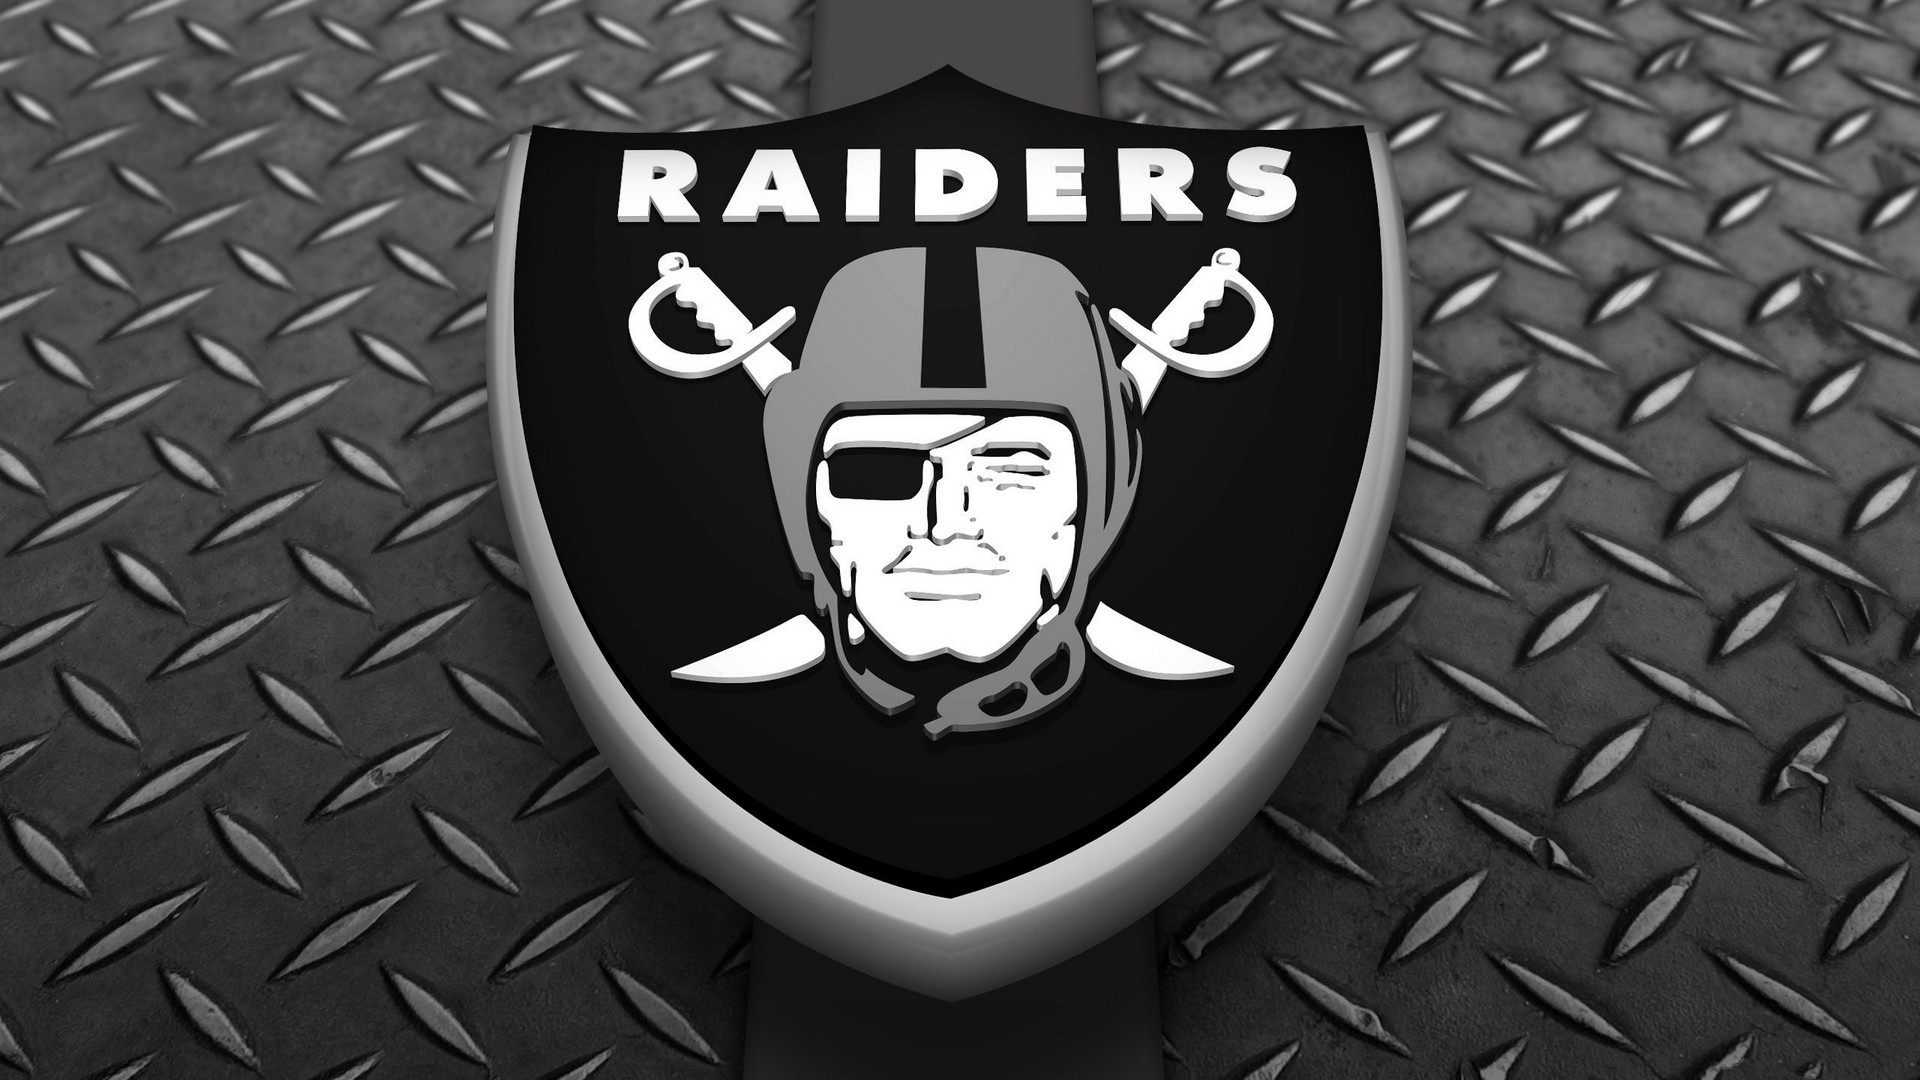 Desktop Wallpapers Oakland Raiders With high-resolution 1920X1080 pixel. Download and set as wallpaper for Desktop Computer, Apple iPhone X, XS Max, XR, 8, 7, 6, SE, iPad, Android